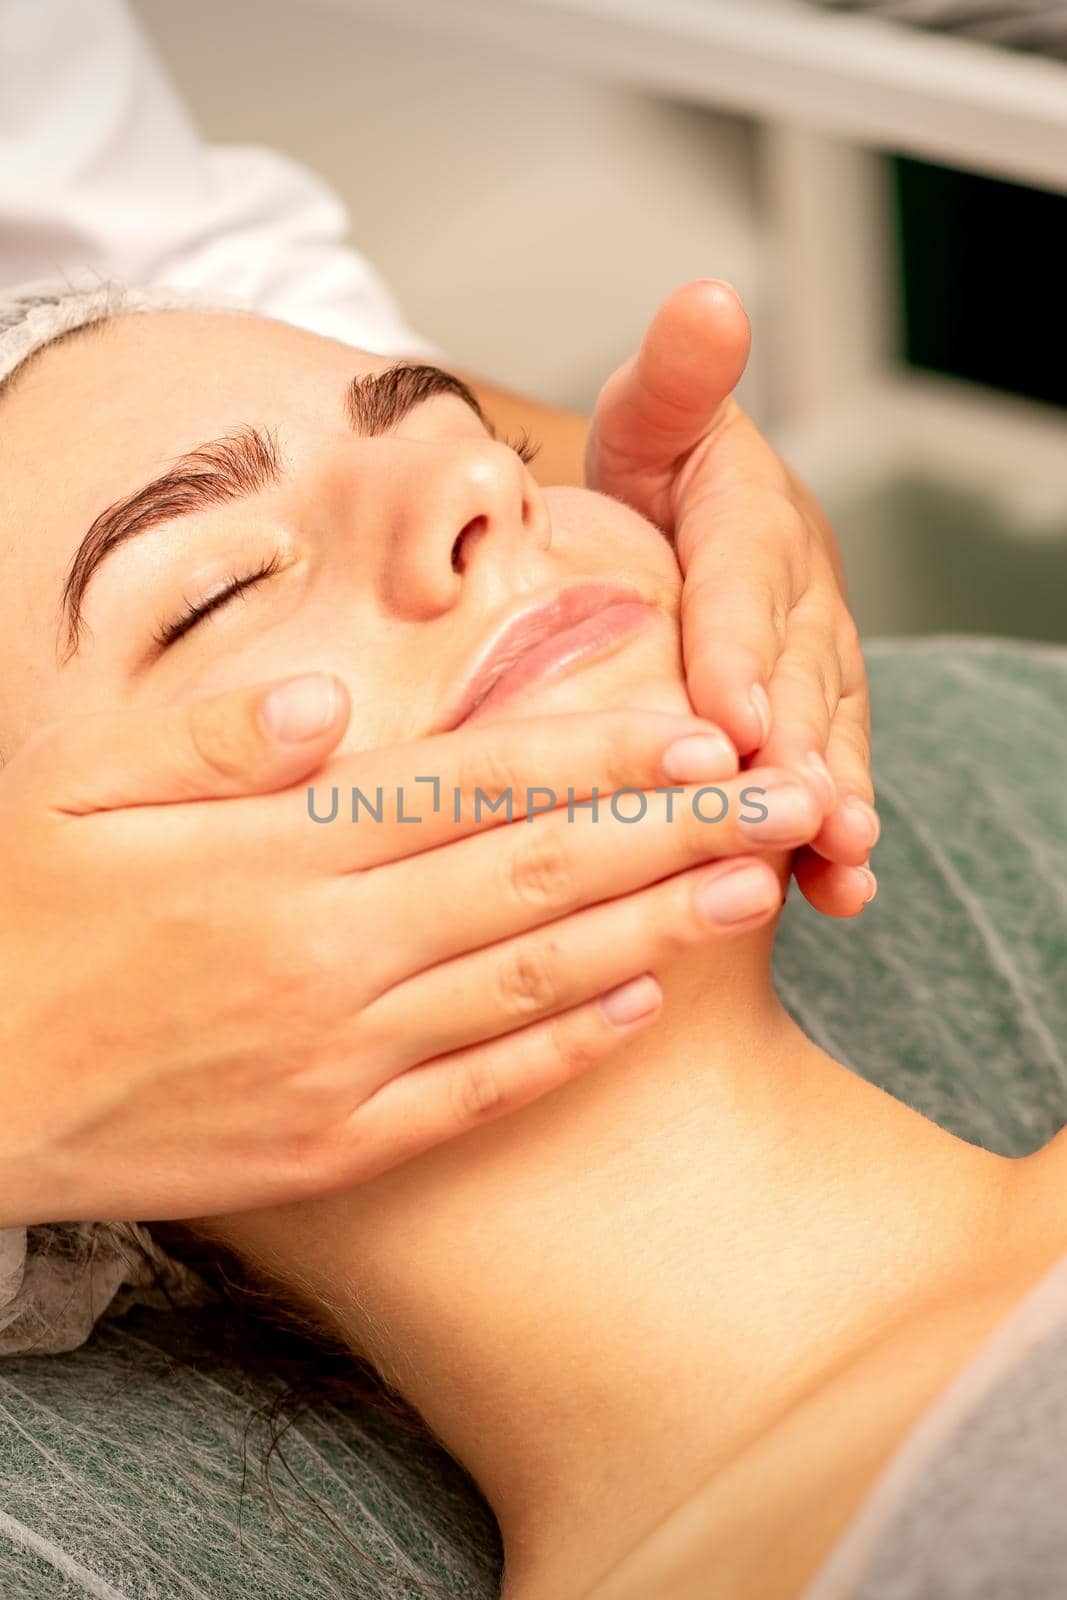 Beautiful caucasian young woman receiving a facial massage with closed eyes in spa salon, close up. Relaxing treatment concept. by okskukuruza